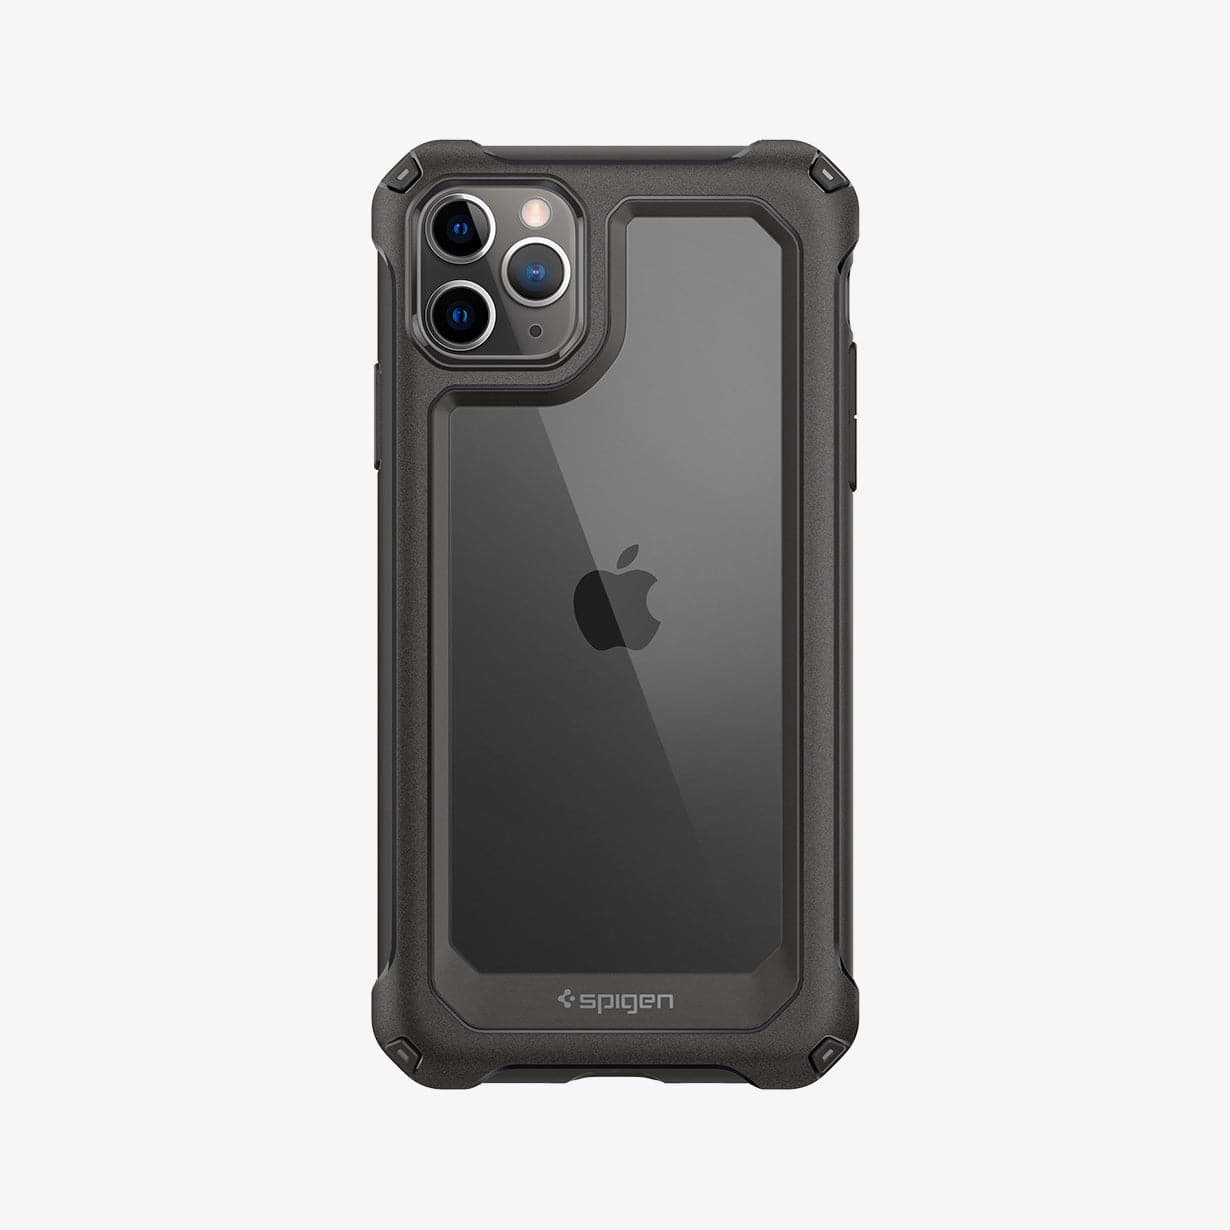 075CS27052 - iPhone 11 Pro Max Case Gauntlet in gunmetal showing the back